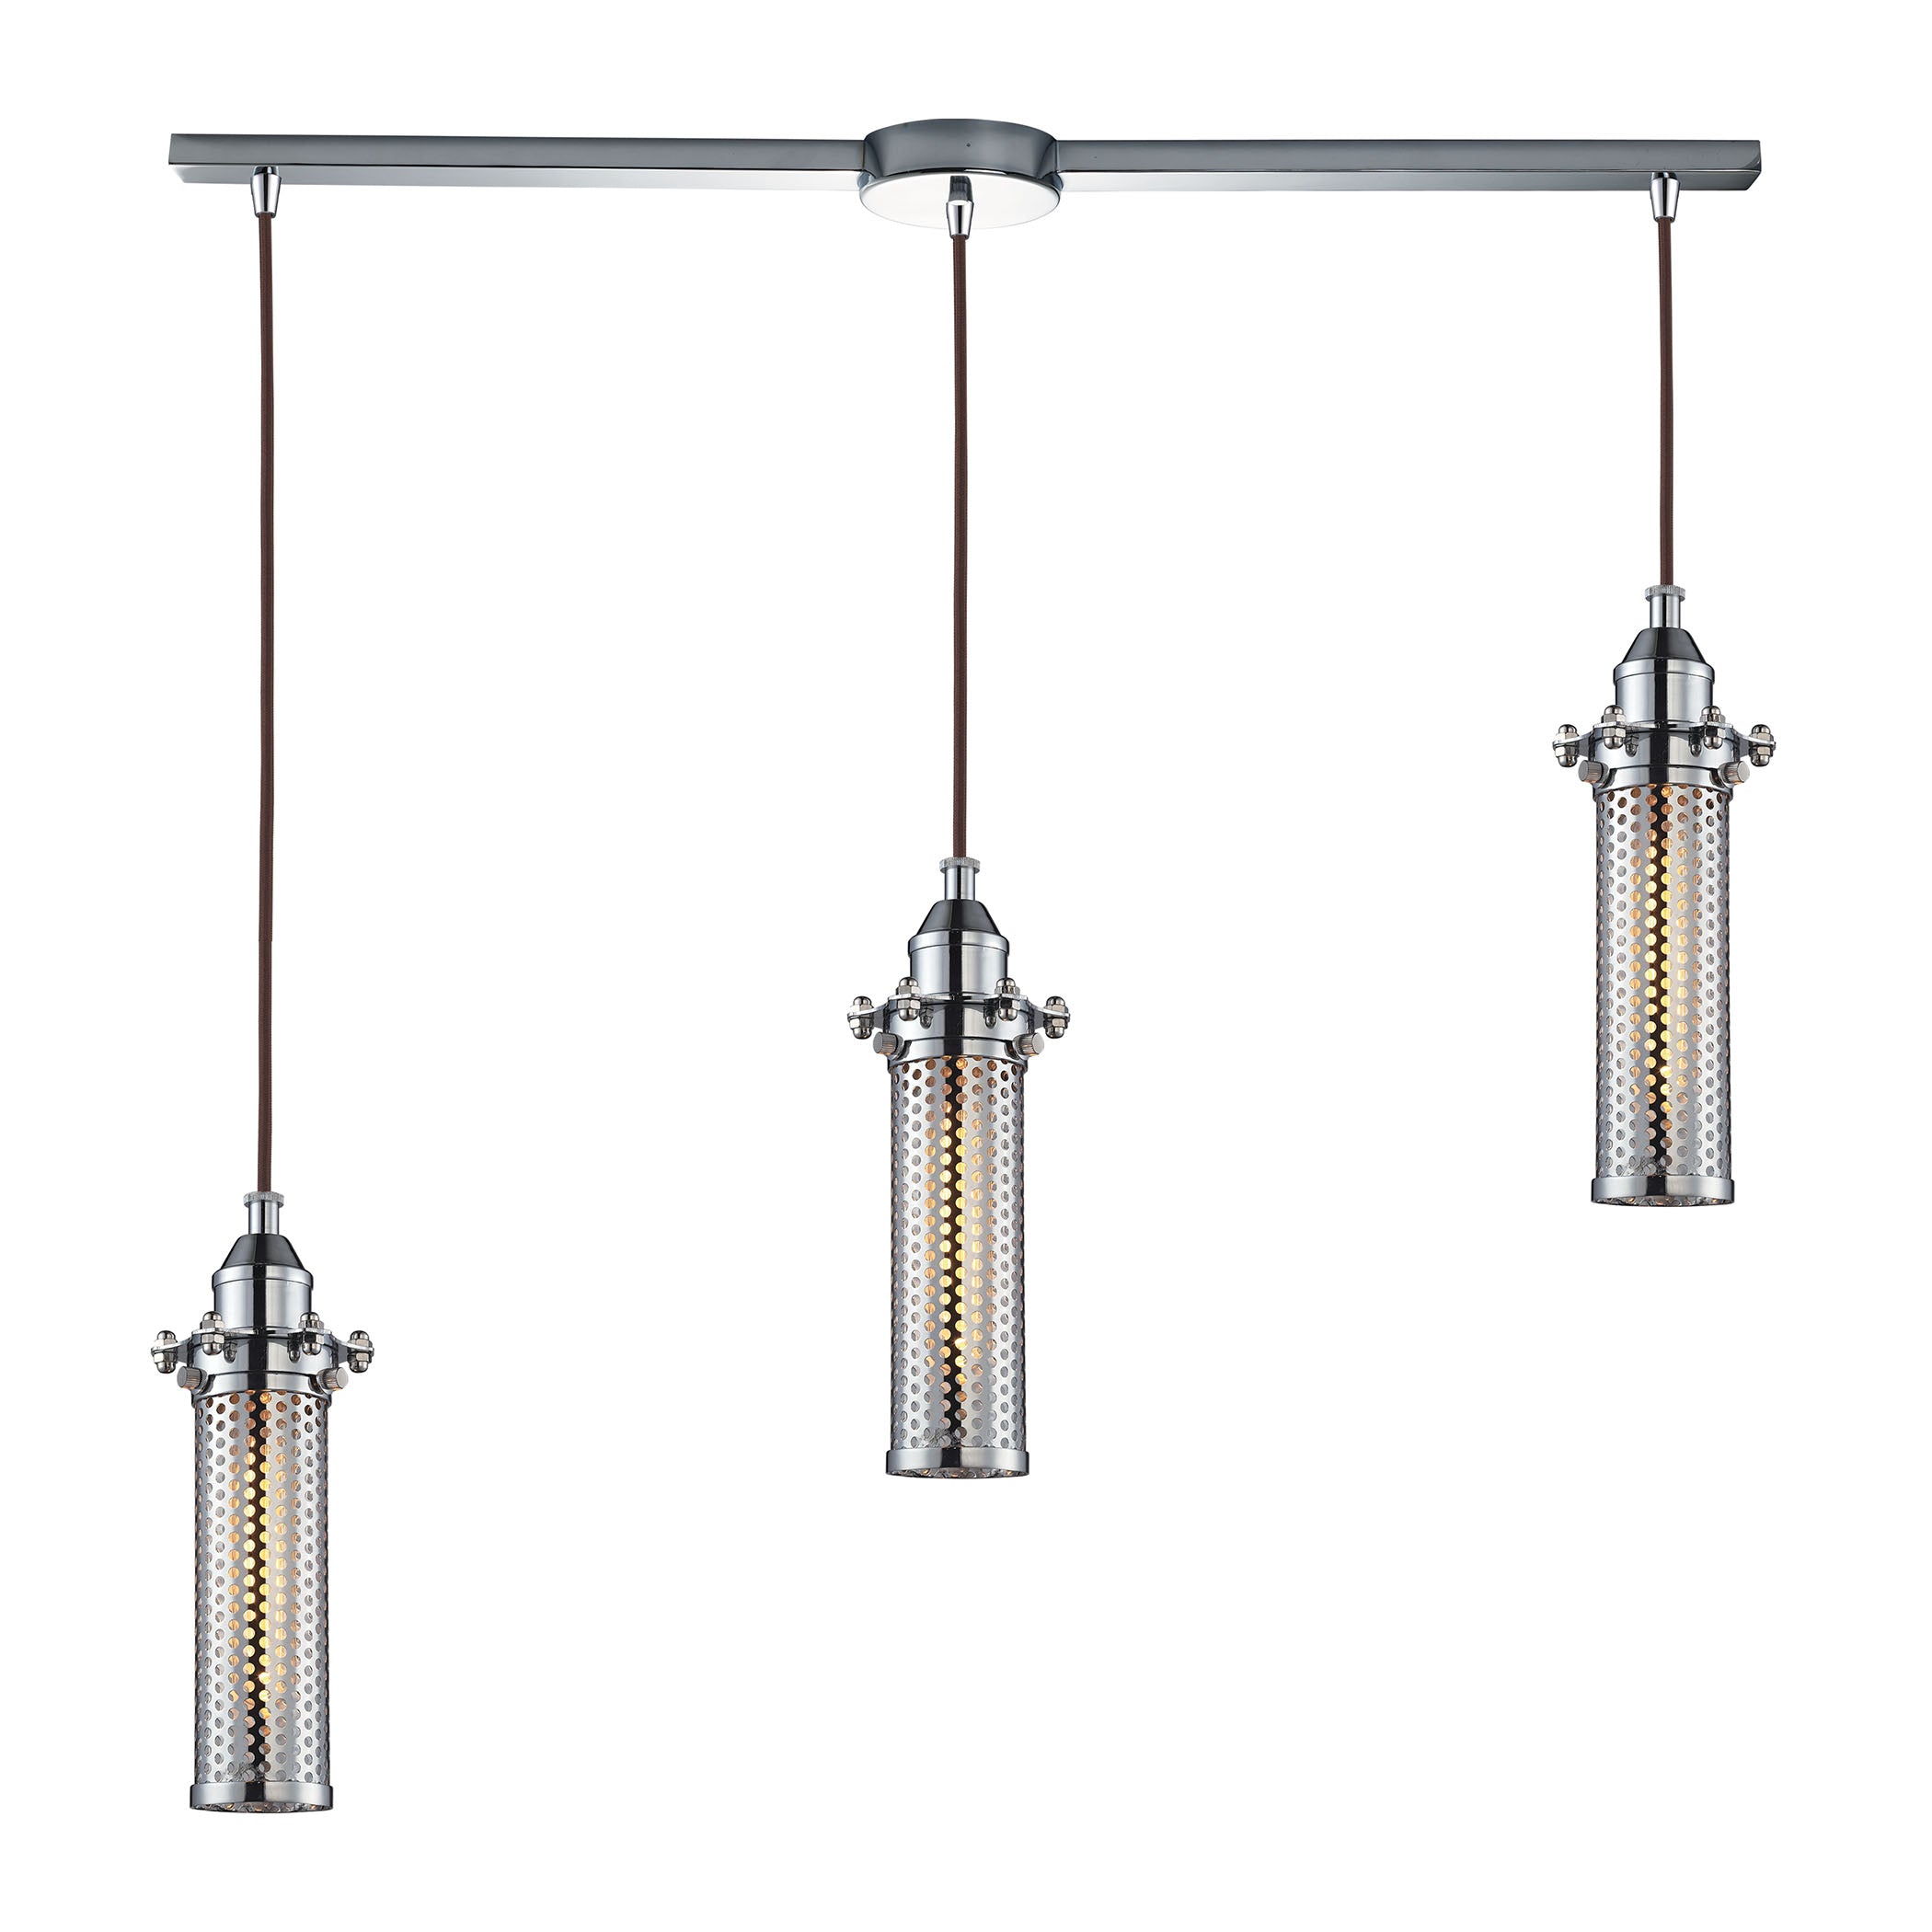 ELK Lighting 66315/3L Fulton 3-Light Linear Pendant Fixture in Polished Chrome with Perforated Metal Shade